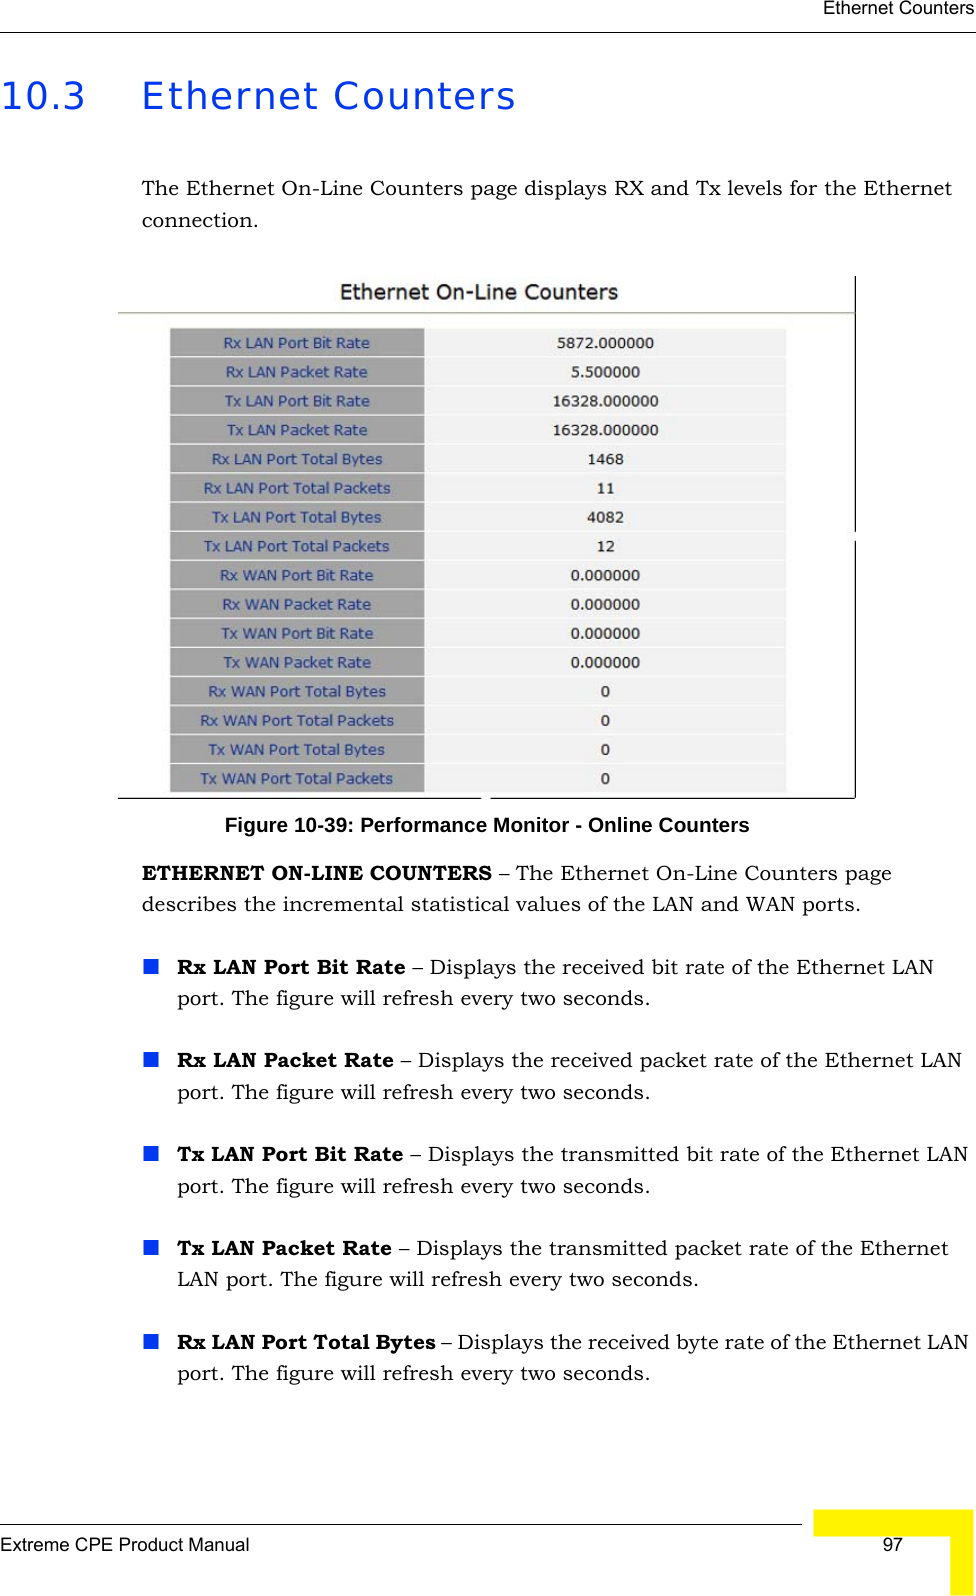 Ethernet CountersExtreme CPE Product Manual  9710.3 Ethernet CountersThe Ethernet On-Line Counters page displays RX and Tx levels for the Ethernet connection.Figure 10-39: Performance Monitor - Online CountersETHERNET ON-LINE COUNTERS – The Ethernet On-Line Counters page describes the incremental statistical values of the LAN and WAN ports.Rx LAN Port Bit Rate – Displays the received bit rate of the Ethernet LAN port. The figure will refresh every two seconds.Rx LAN Packet Rate – Displays the received packet rate of the Ethernet LAN port. The figure will refresh every two seconds.Tx LAN Port Bit Rate – Displays the transmitted bit rate of the Ethernet LAN port. The figure will refresh every two seconds.Tx LAN Packet Rate – Displays the transmitted packet rate of the Ethernet LAN port. The figure will refresh every two seconds.Rx LAN Port Total Bytes – Displays the received byte rate of the Ethernet LAN port. The figure will refresh every two seconds.